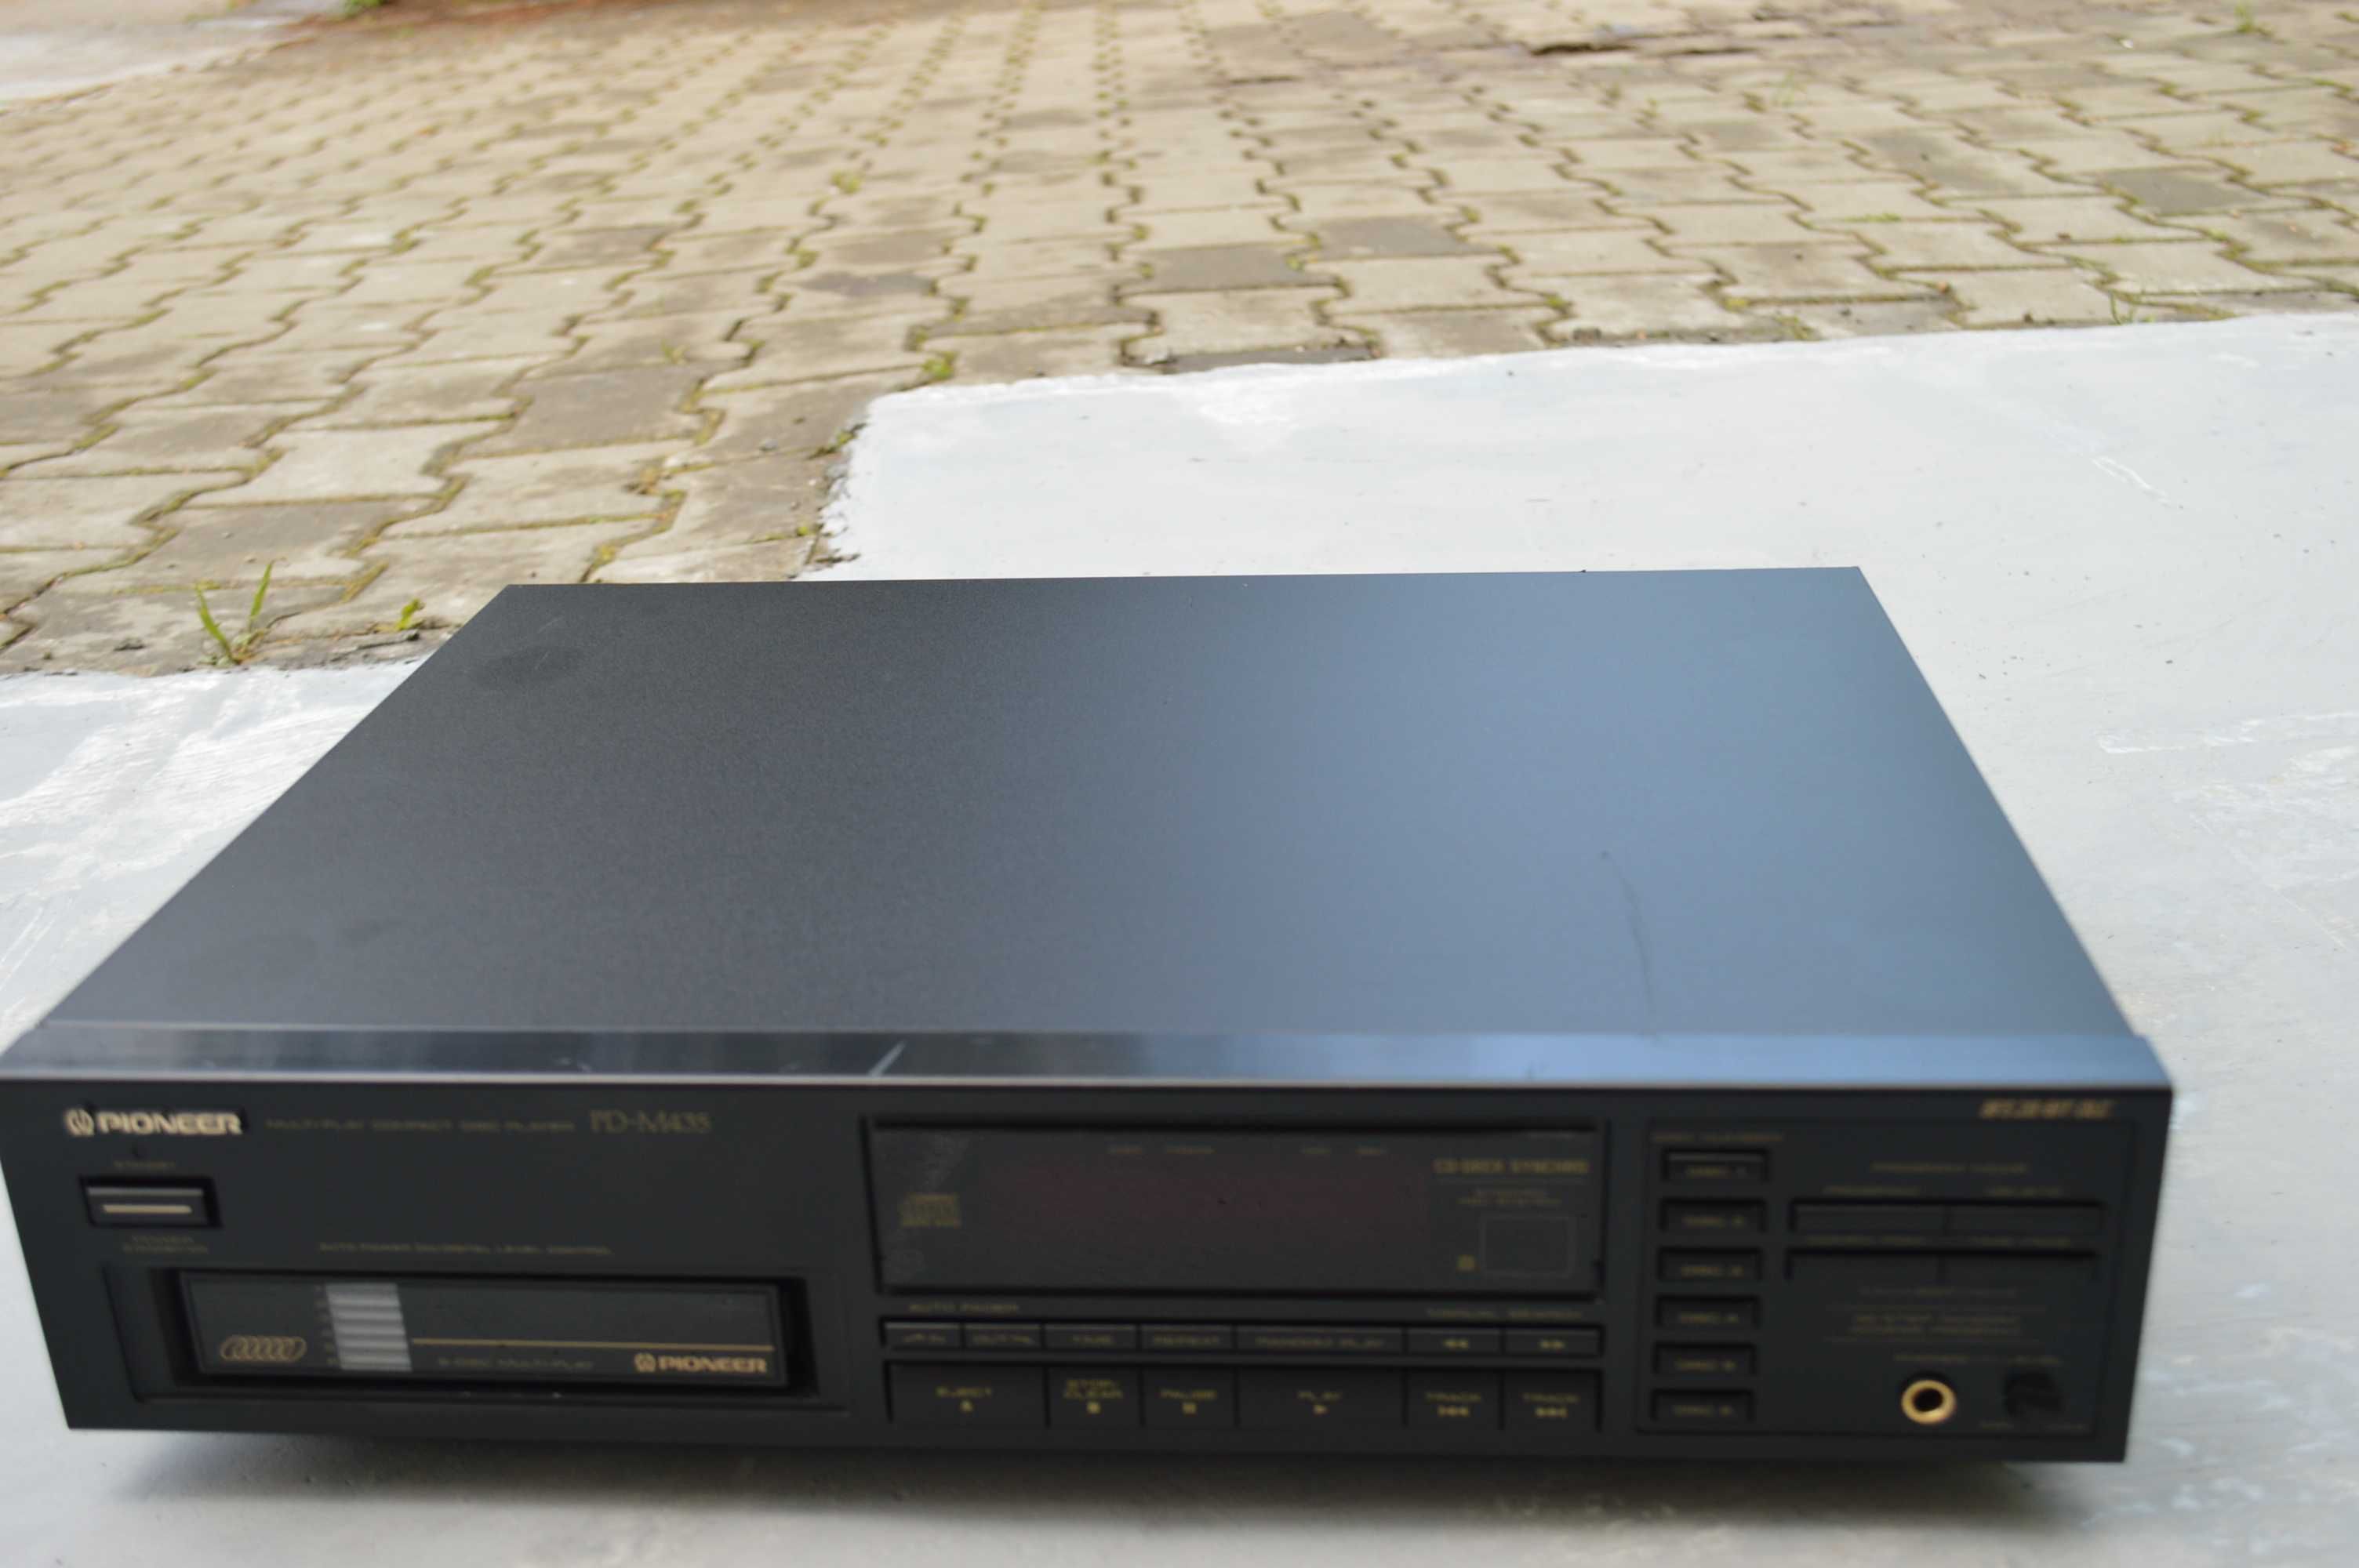 Cd Player Pioneer PD M 435